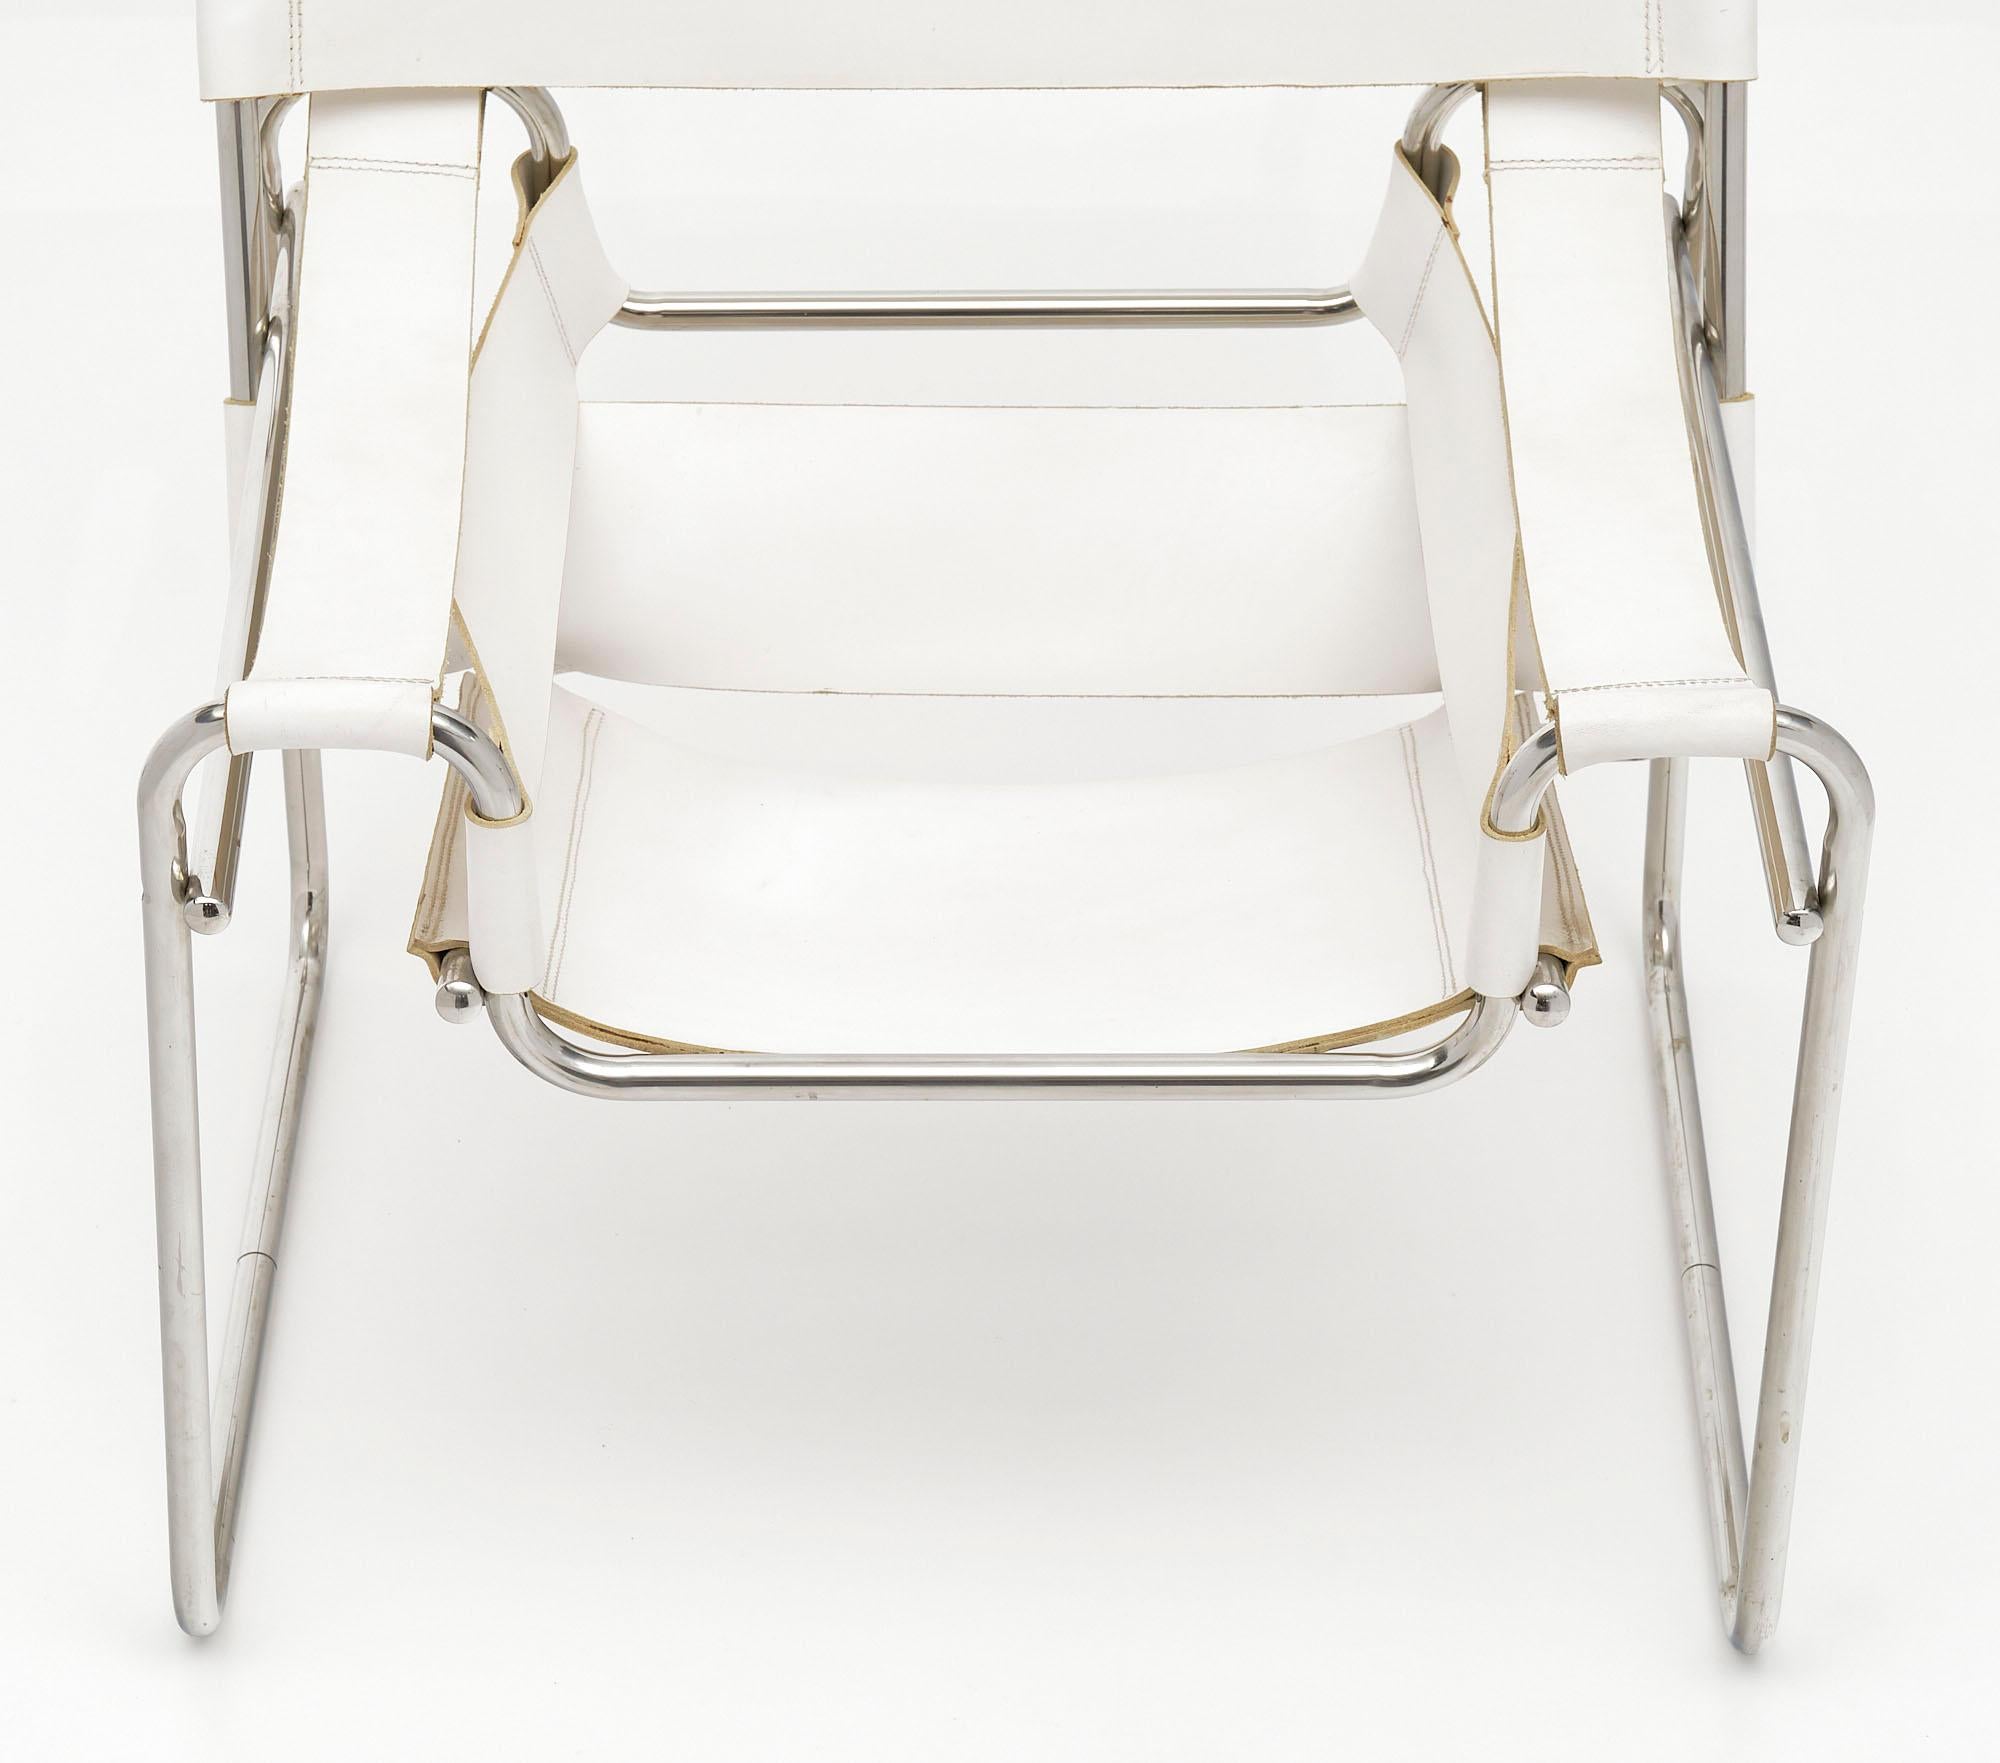 Marcel Breuer’s Wassily Design Style Armchair In Good Condition For Sale In Austin, TX